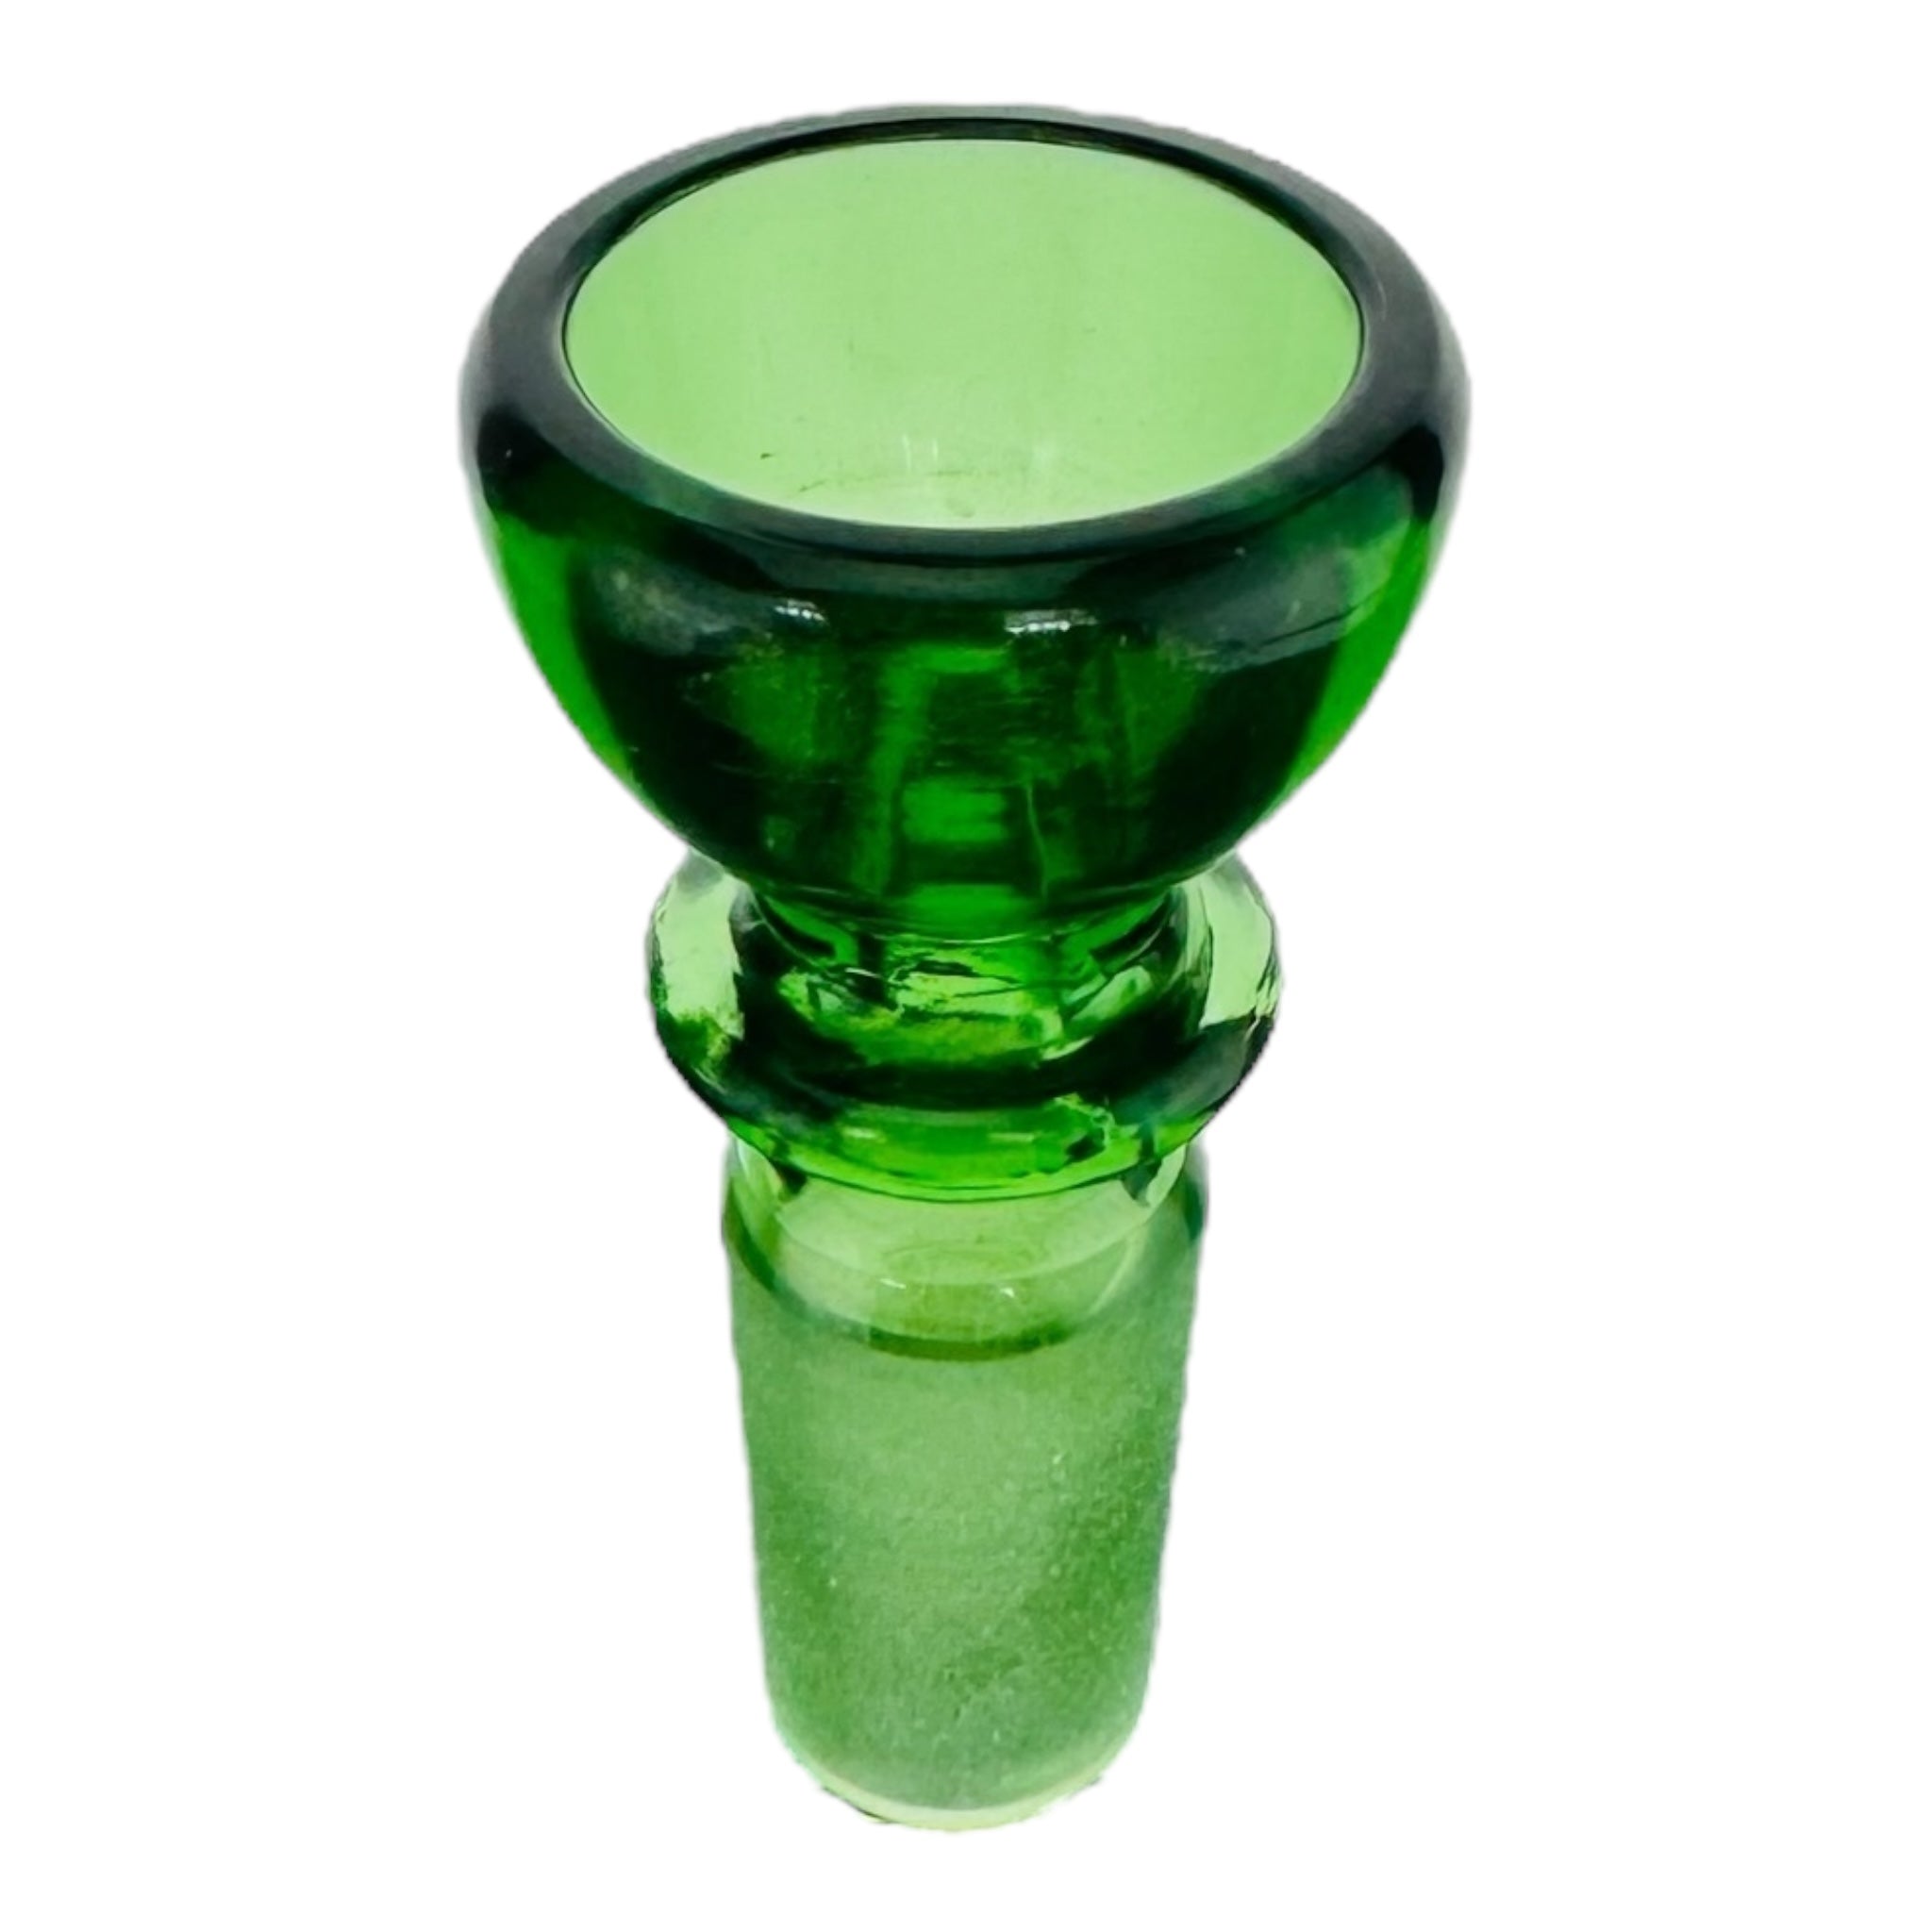 14mm Bong Bowl With Full Green Color